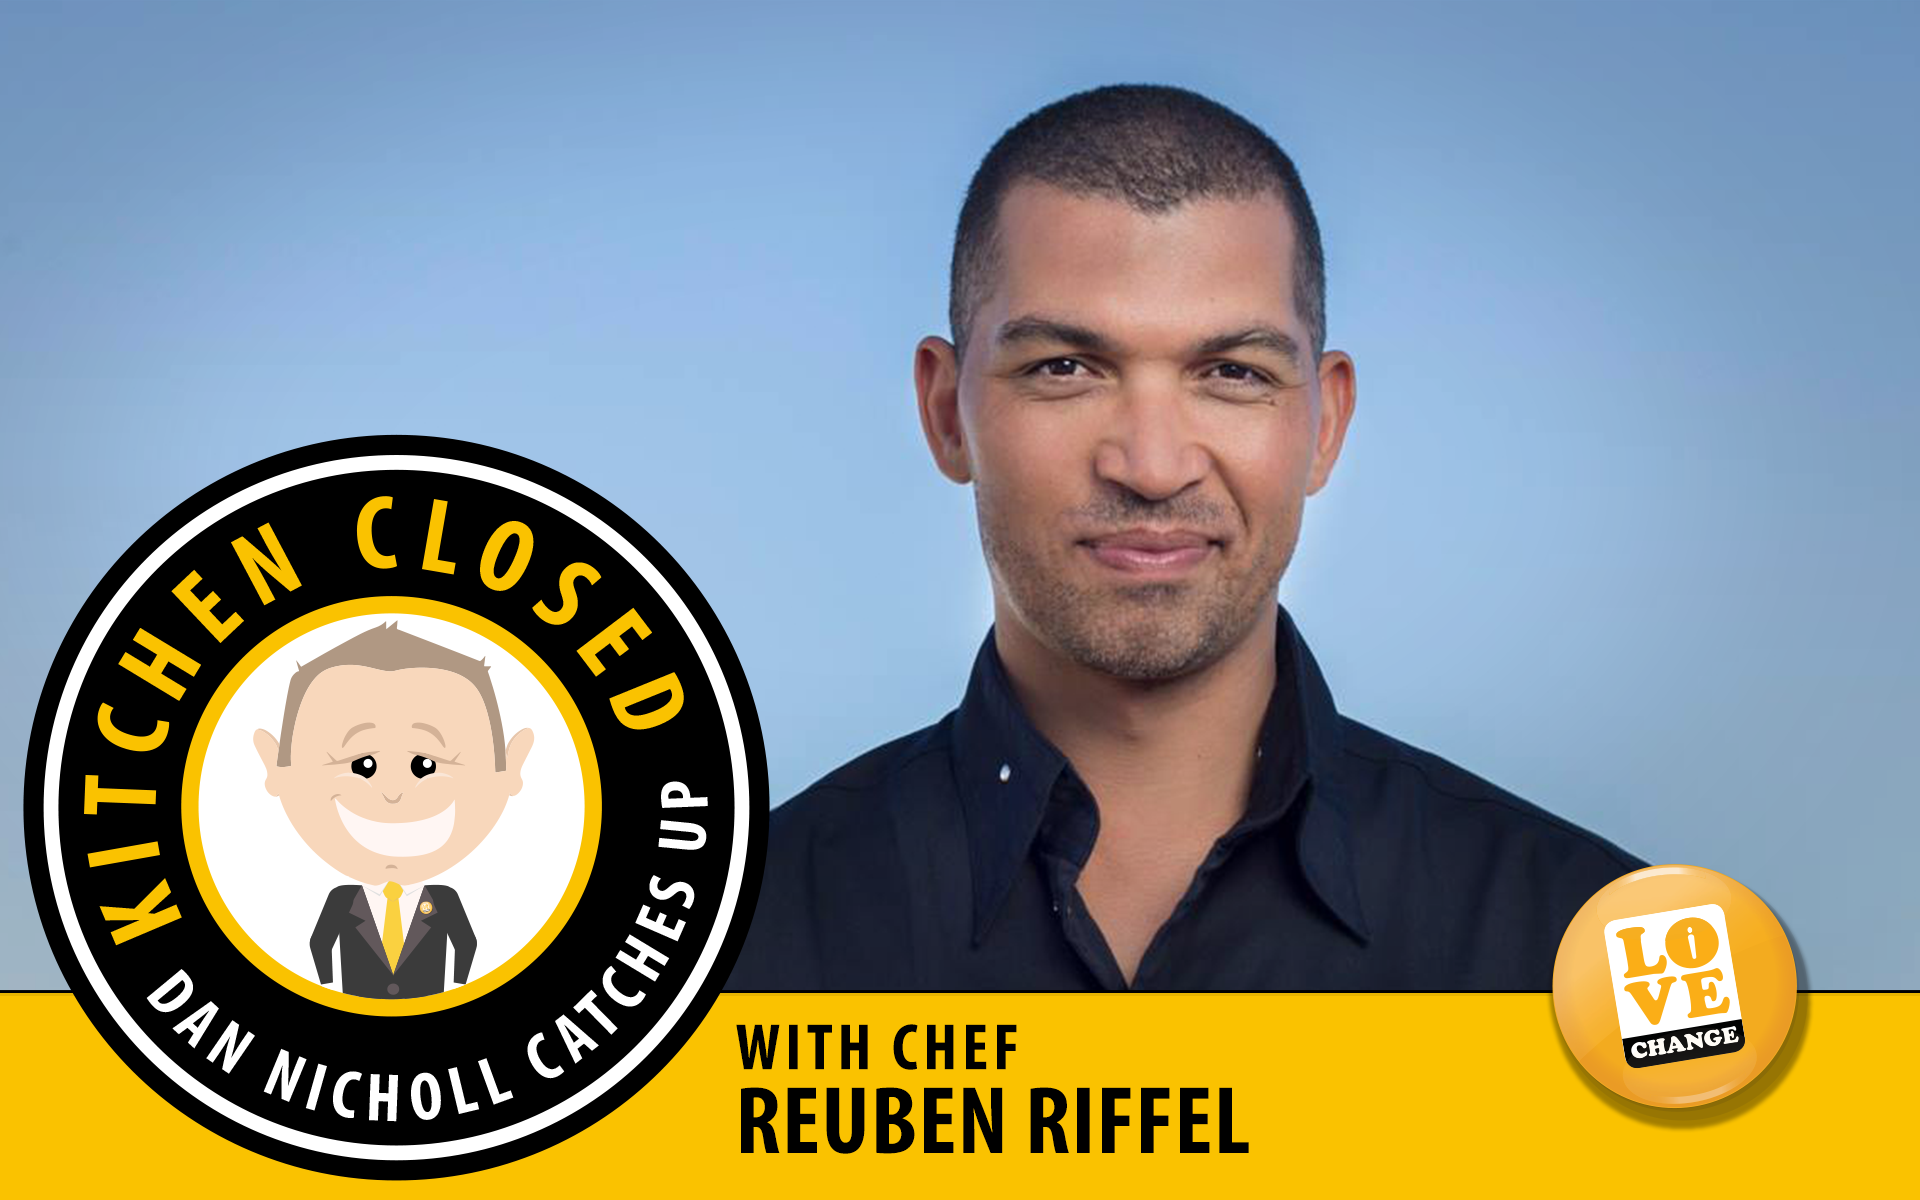 Kitchen Closed with Dan Nicholl and Chef Reuben Riffel